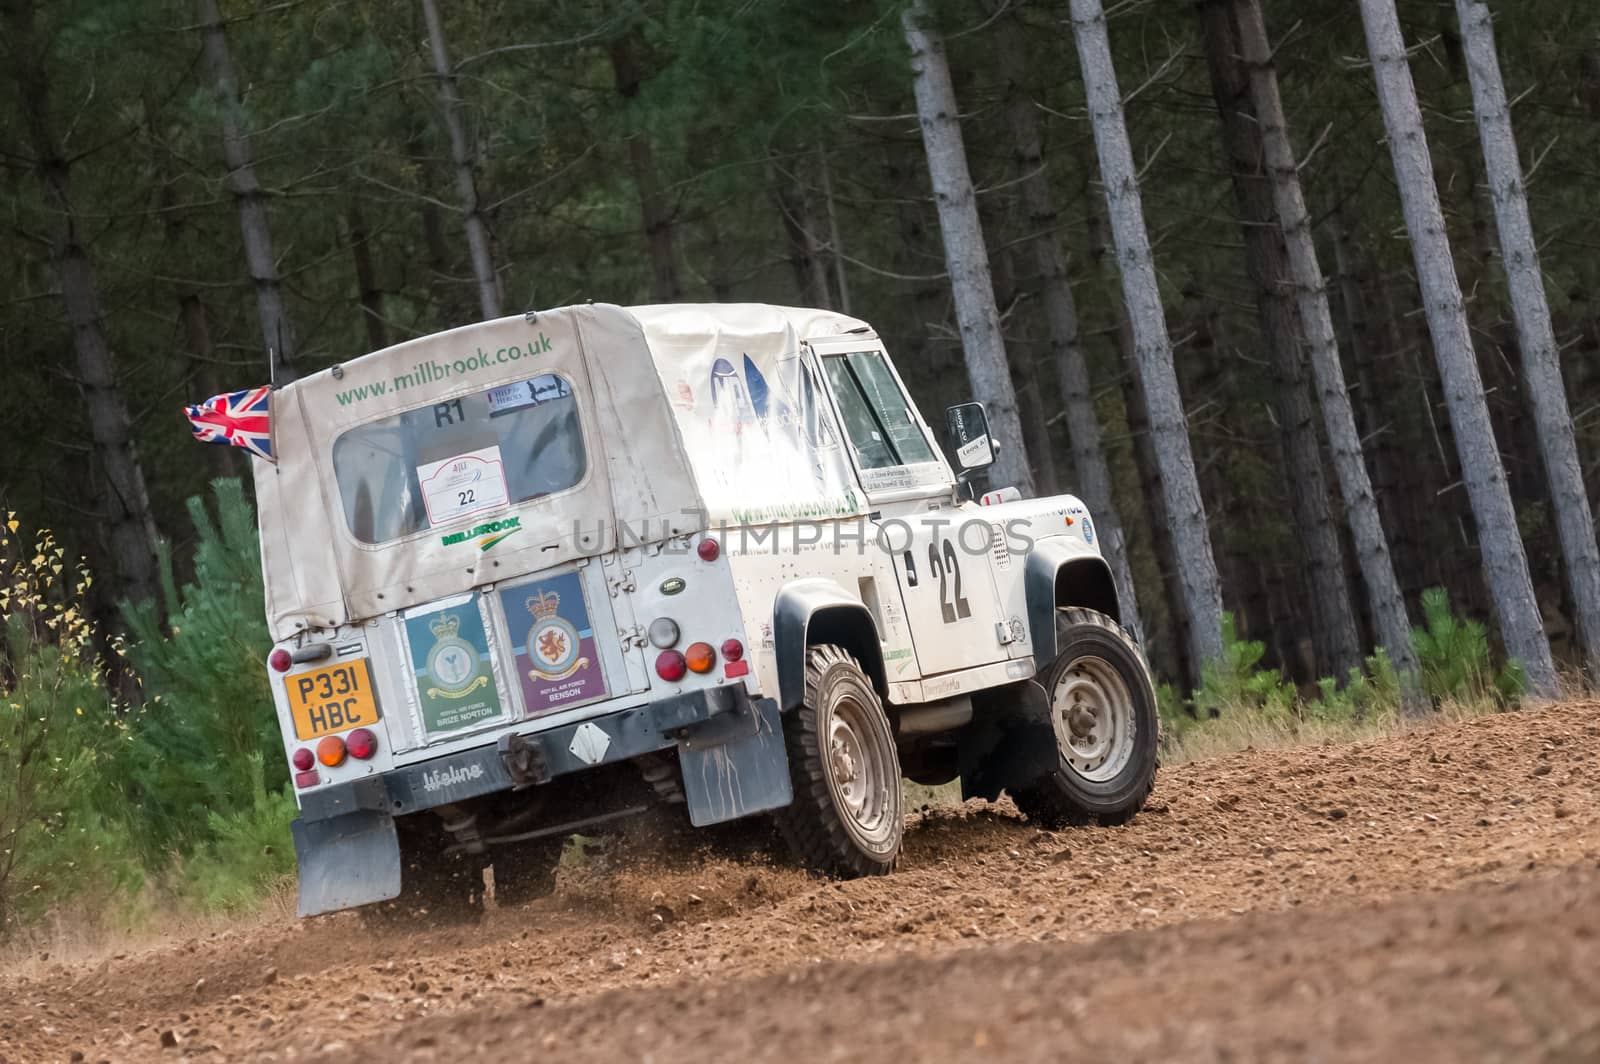 Land Rover rally car by nelsonart